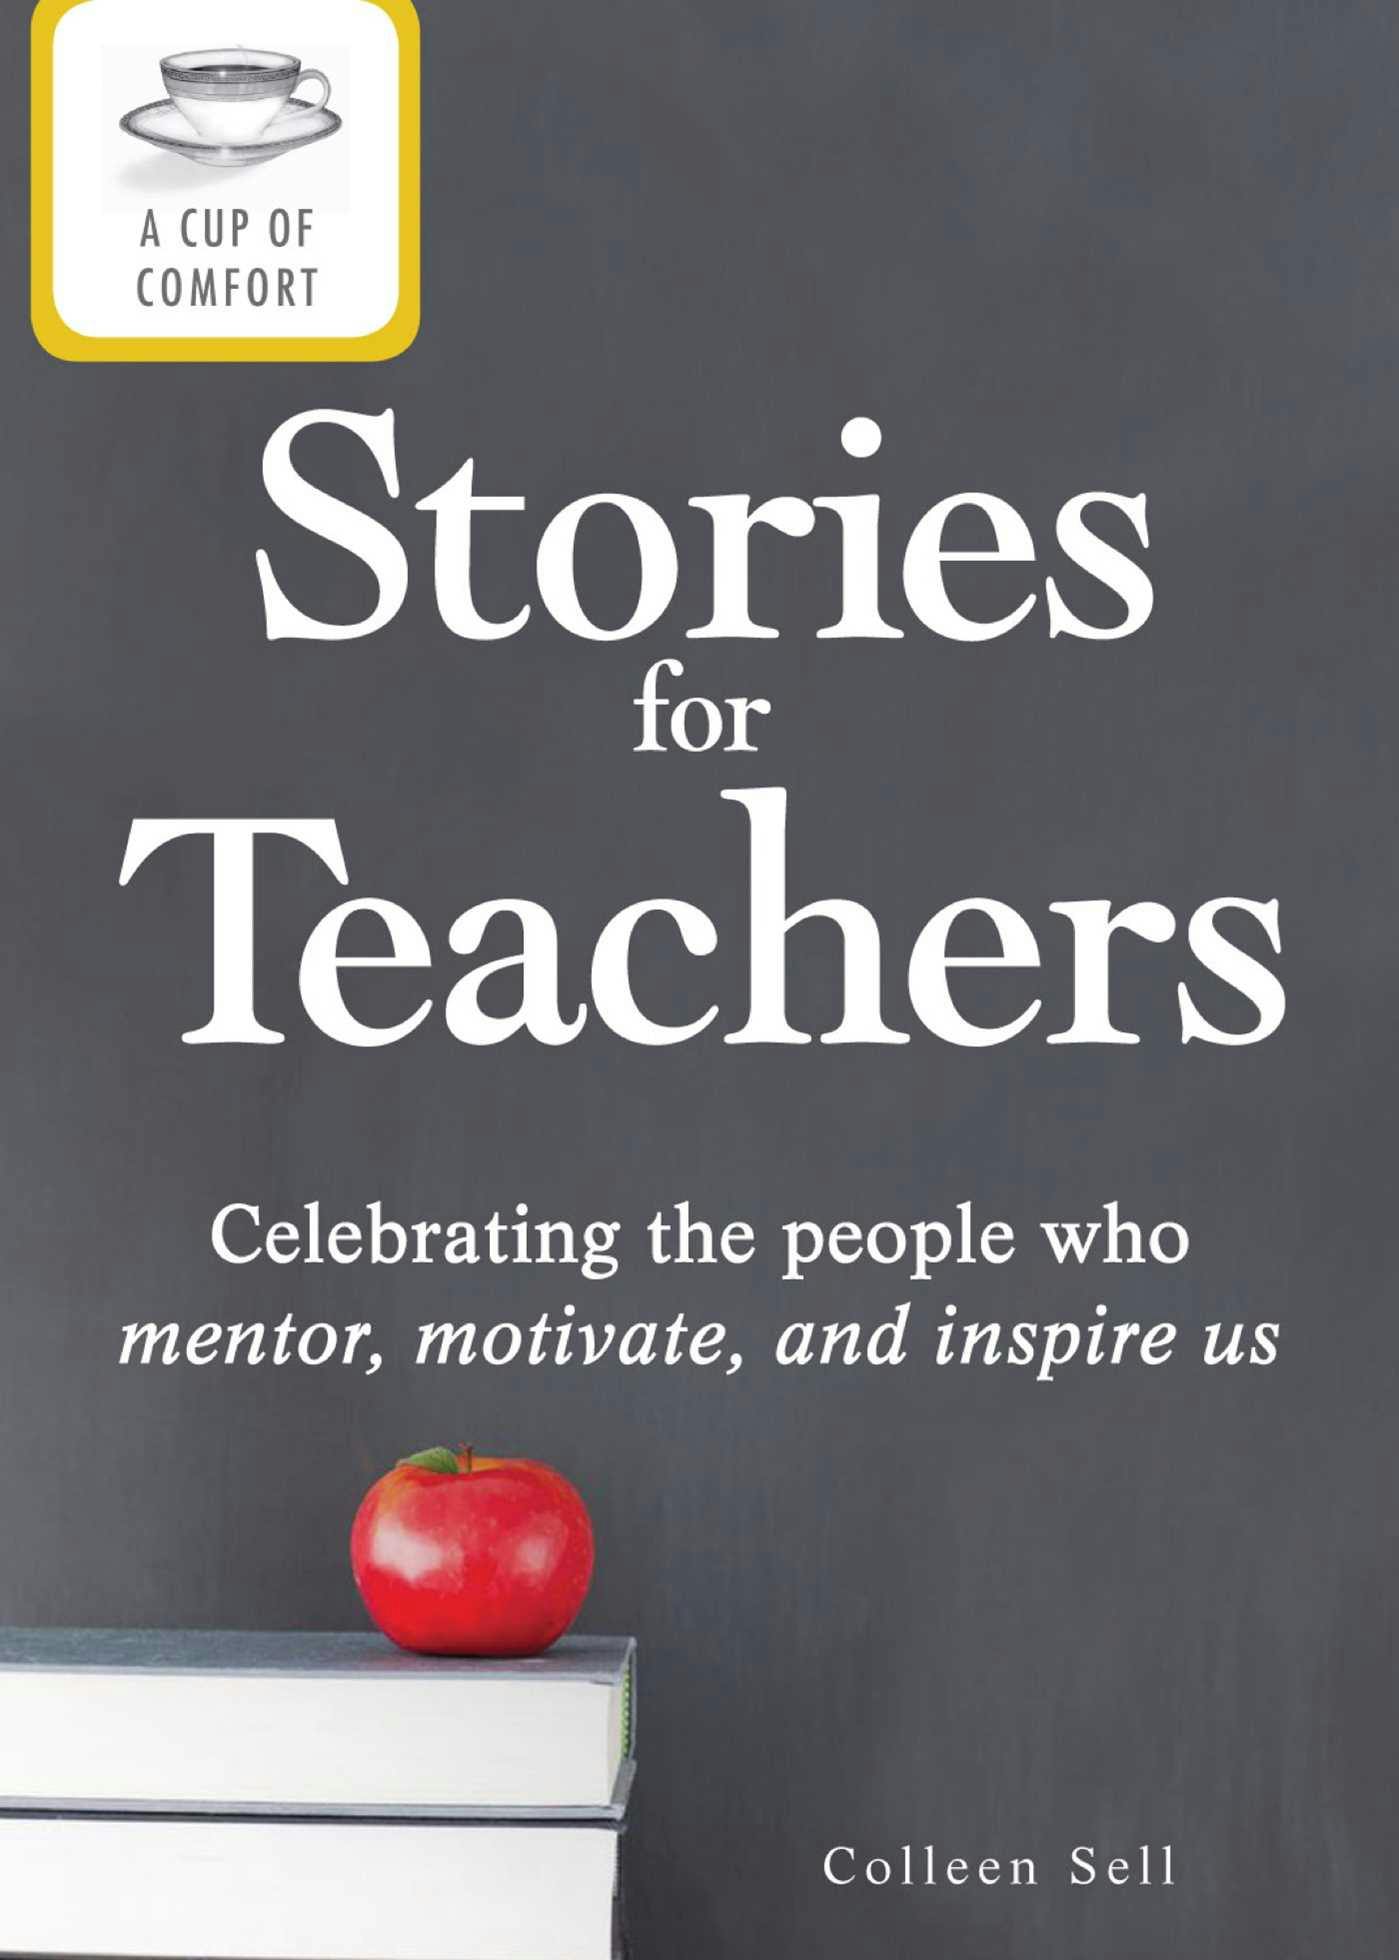 A Cup of Comfort Stories for Teachers: Celebrating the people who mentor, motivate, and inspire us - undefined